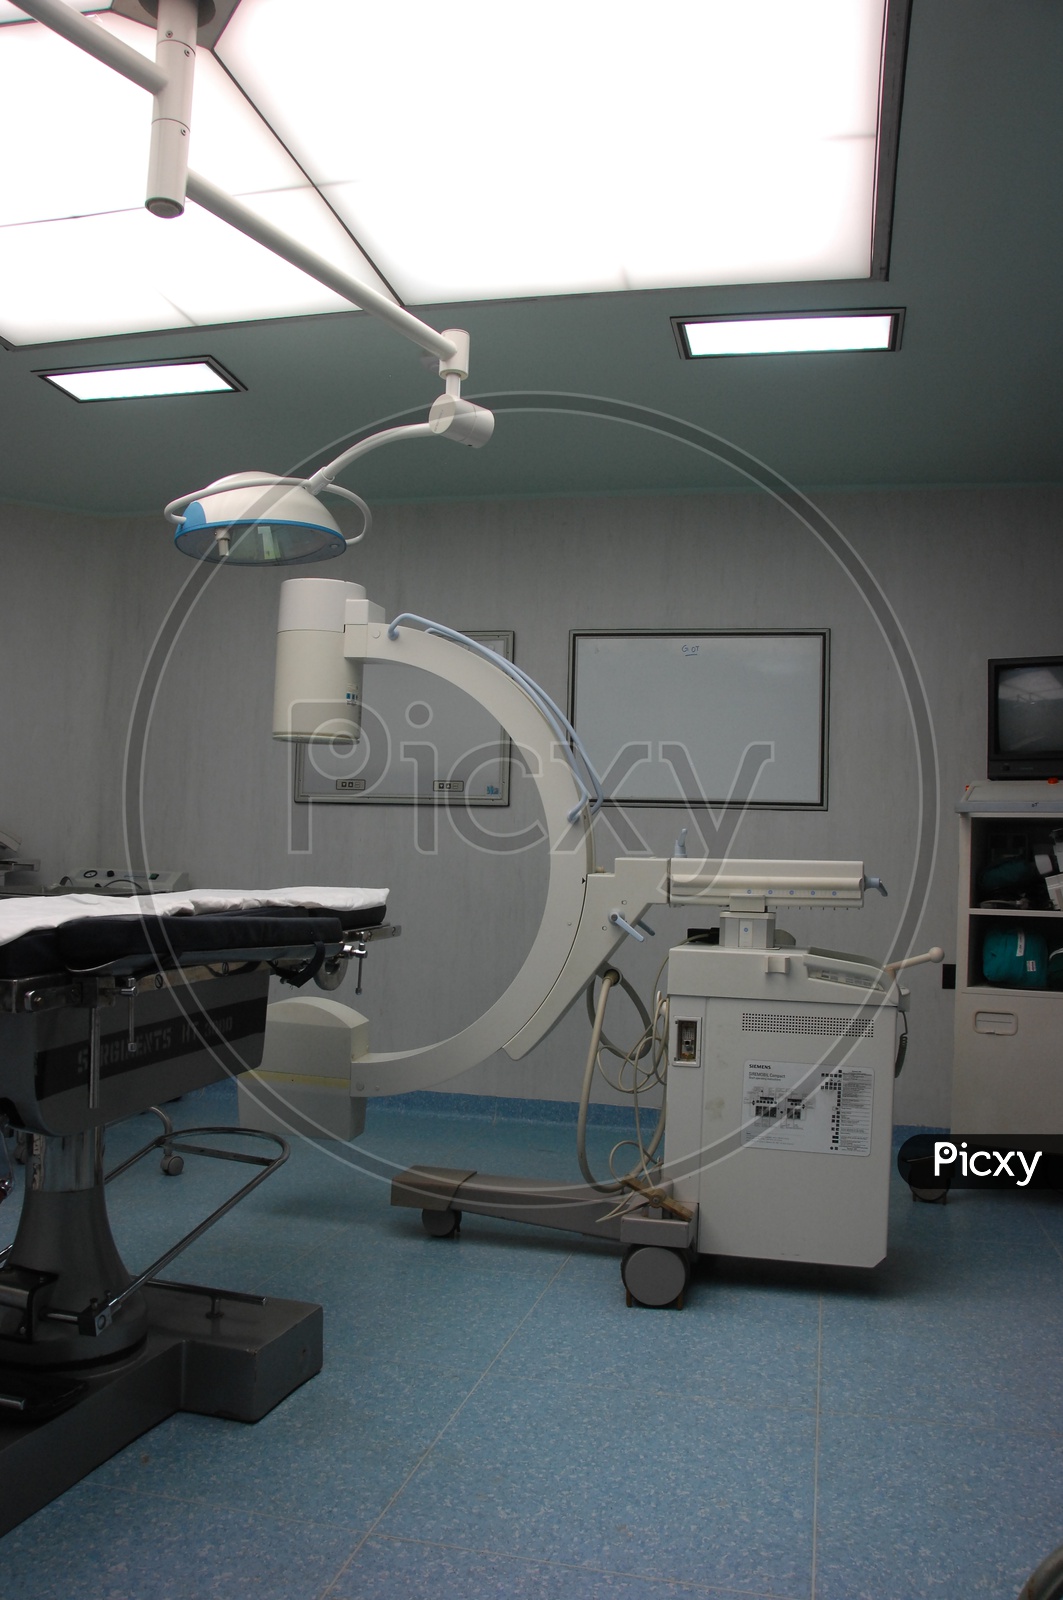 equipment and medical devices with Patient Bed in Hospital